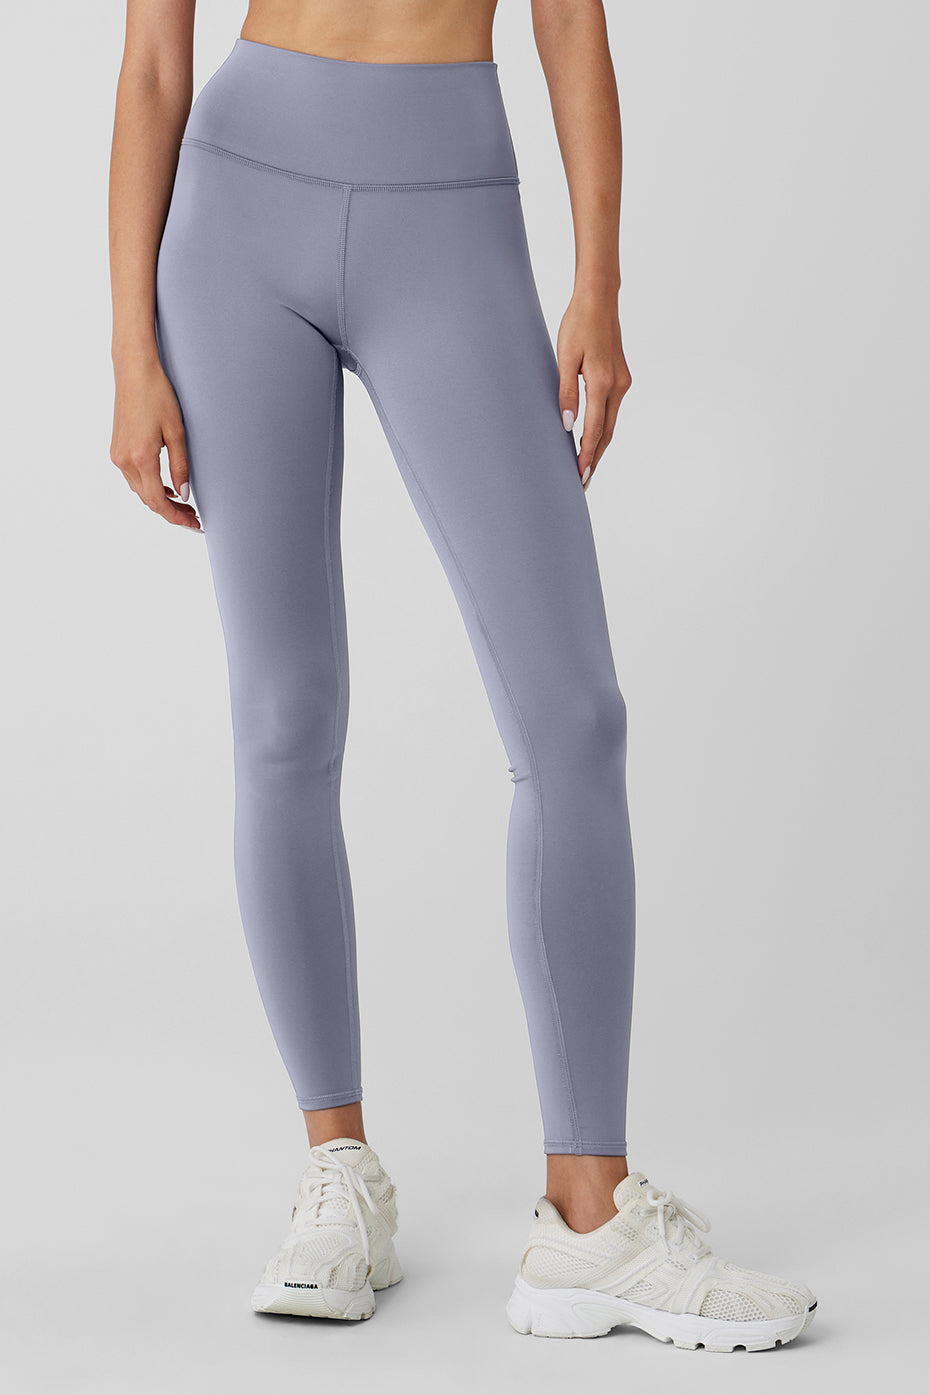 Alo Yoga High-Waisted Avenue Legging - Women's Olive Branch, XXS :  Clothing, Shoes & Jewelry 